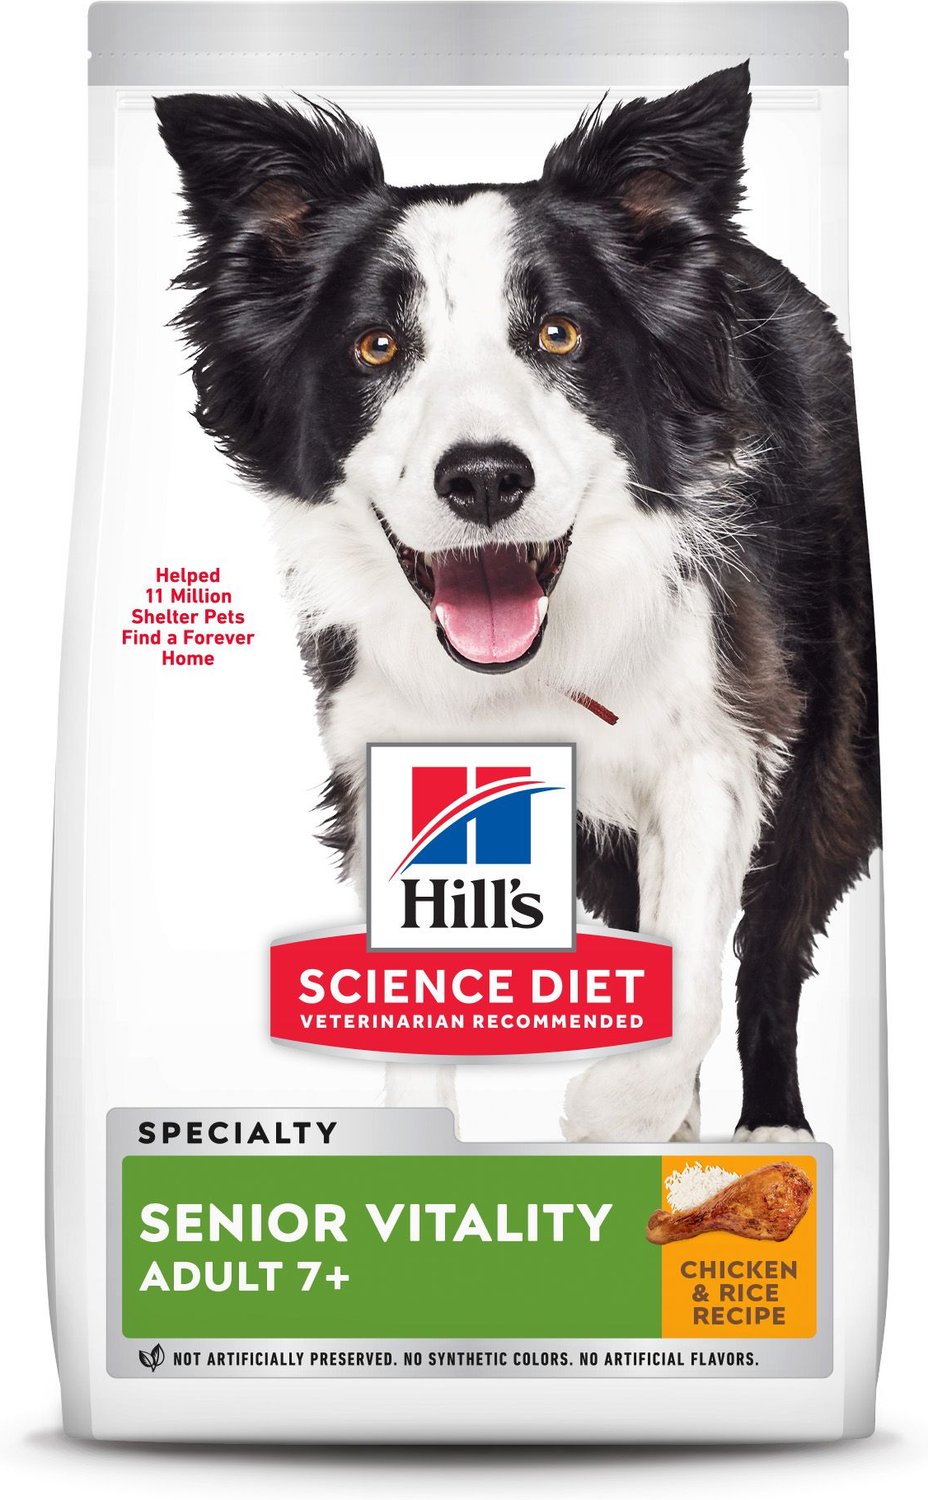 Hill's Science Diet Adult 7+ Senior Vitality Chicken Recipe Dry Dog Food